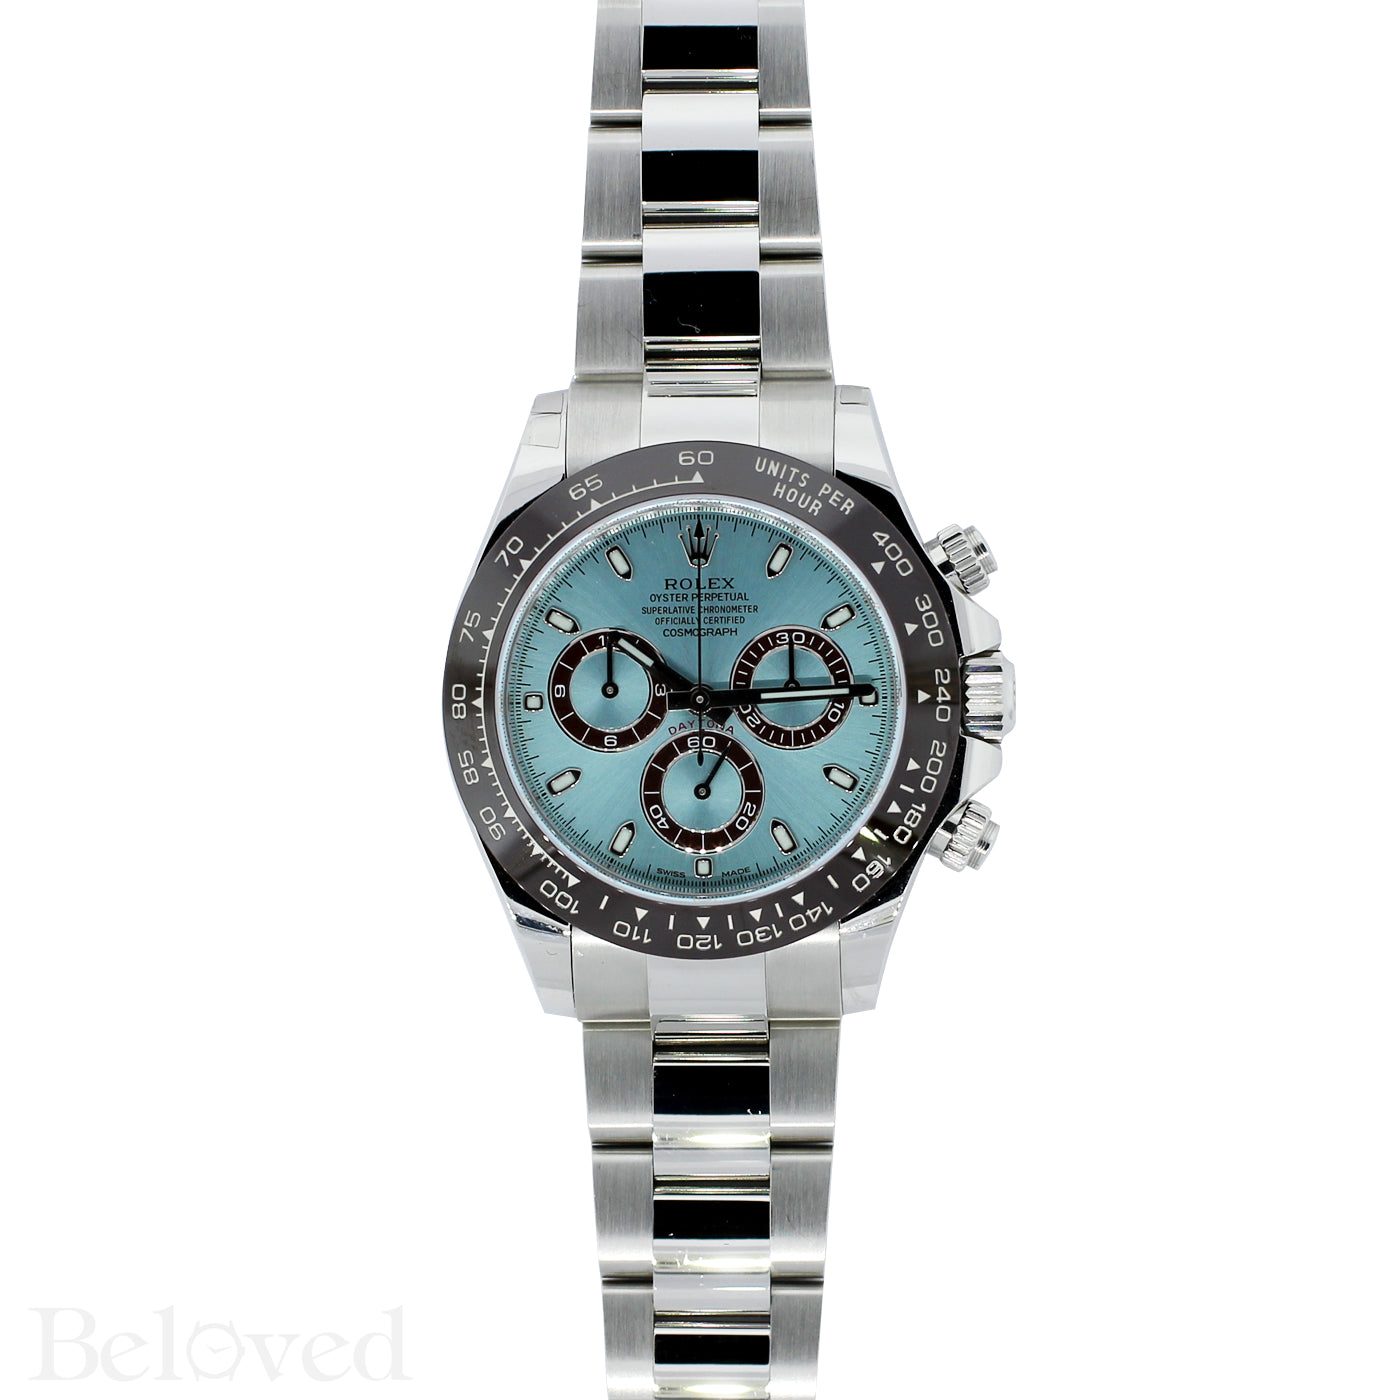 Rolex Daytona 116506 Unworn and Complete with Five Year Warranty Card Image 2